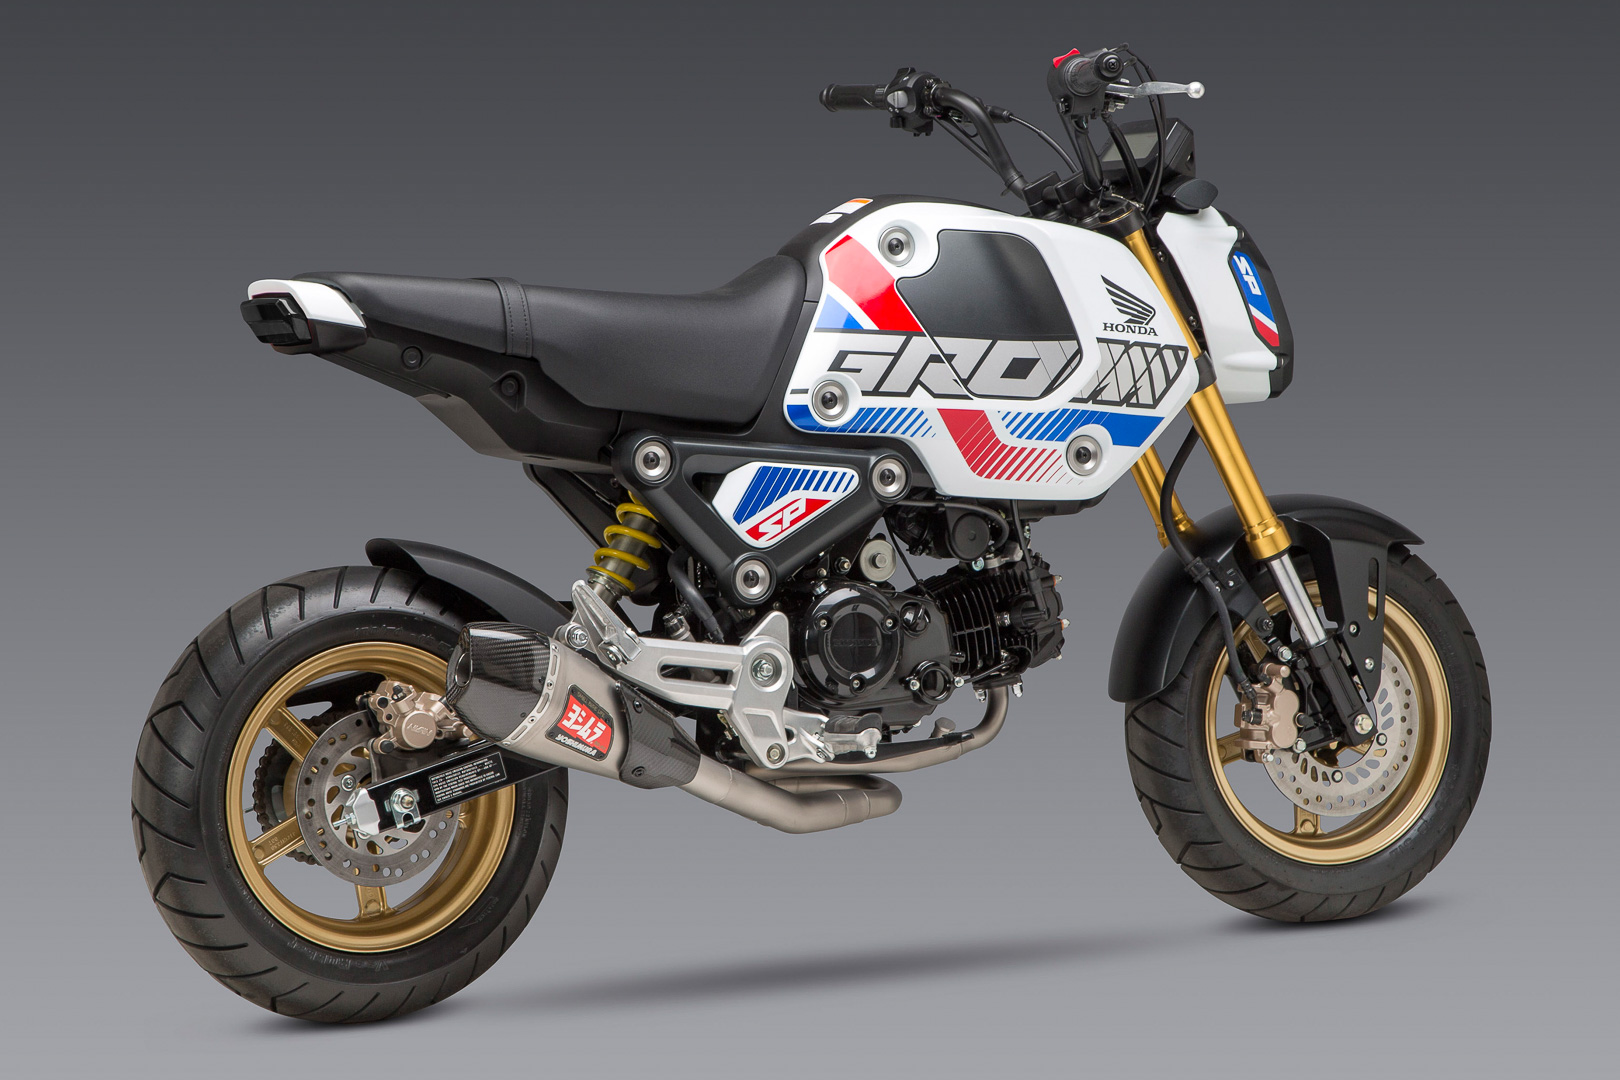 Yoshimura Accessories For 2022 Honda Grom Exhausts and More